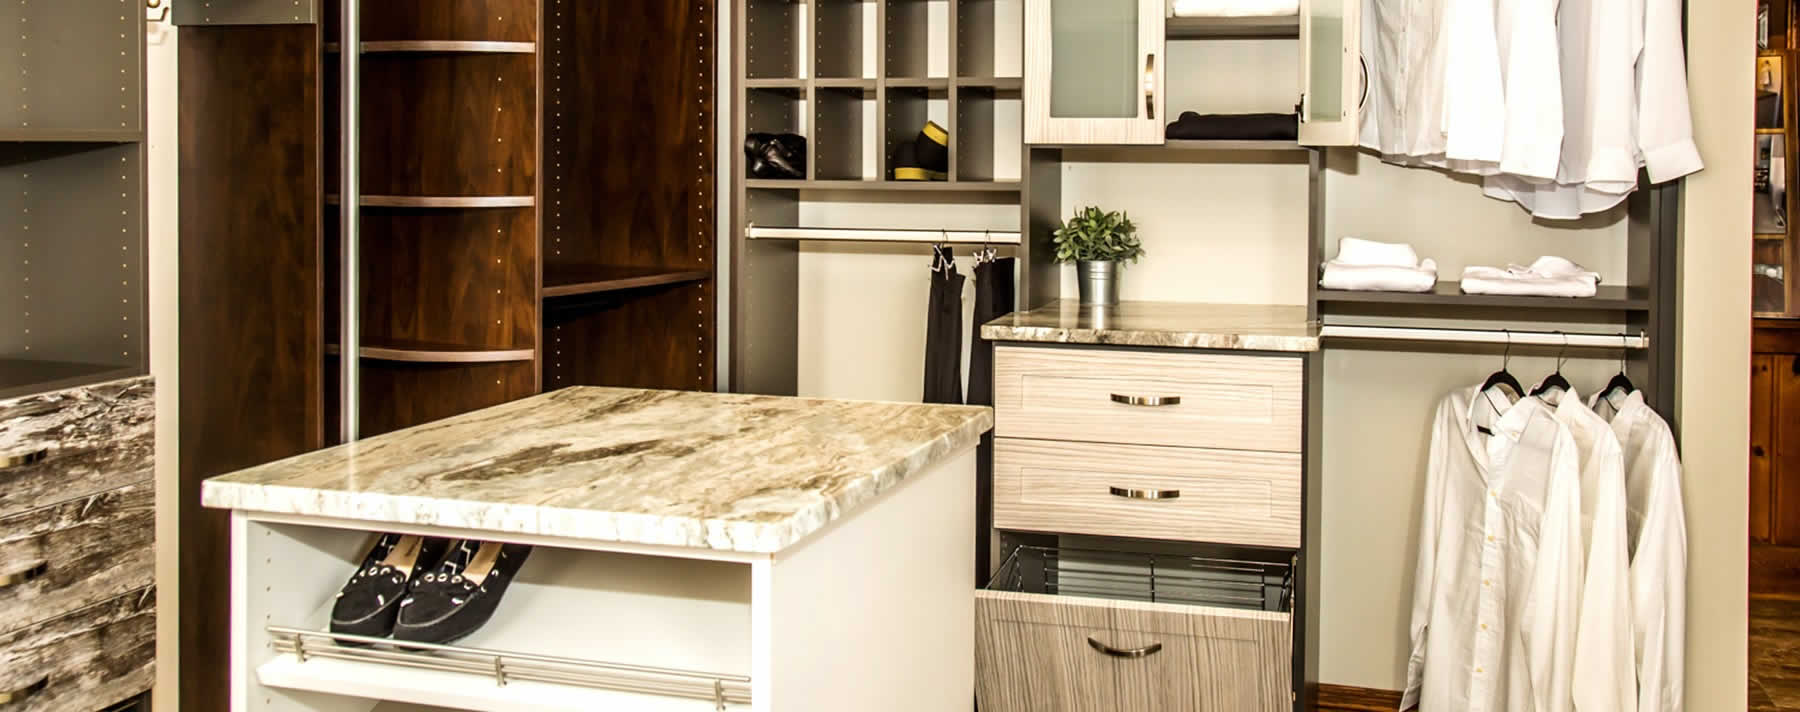 Detroit Lakes Kitchen And Bathroom Cabinets Cabinets Plus